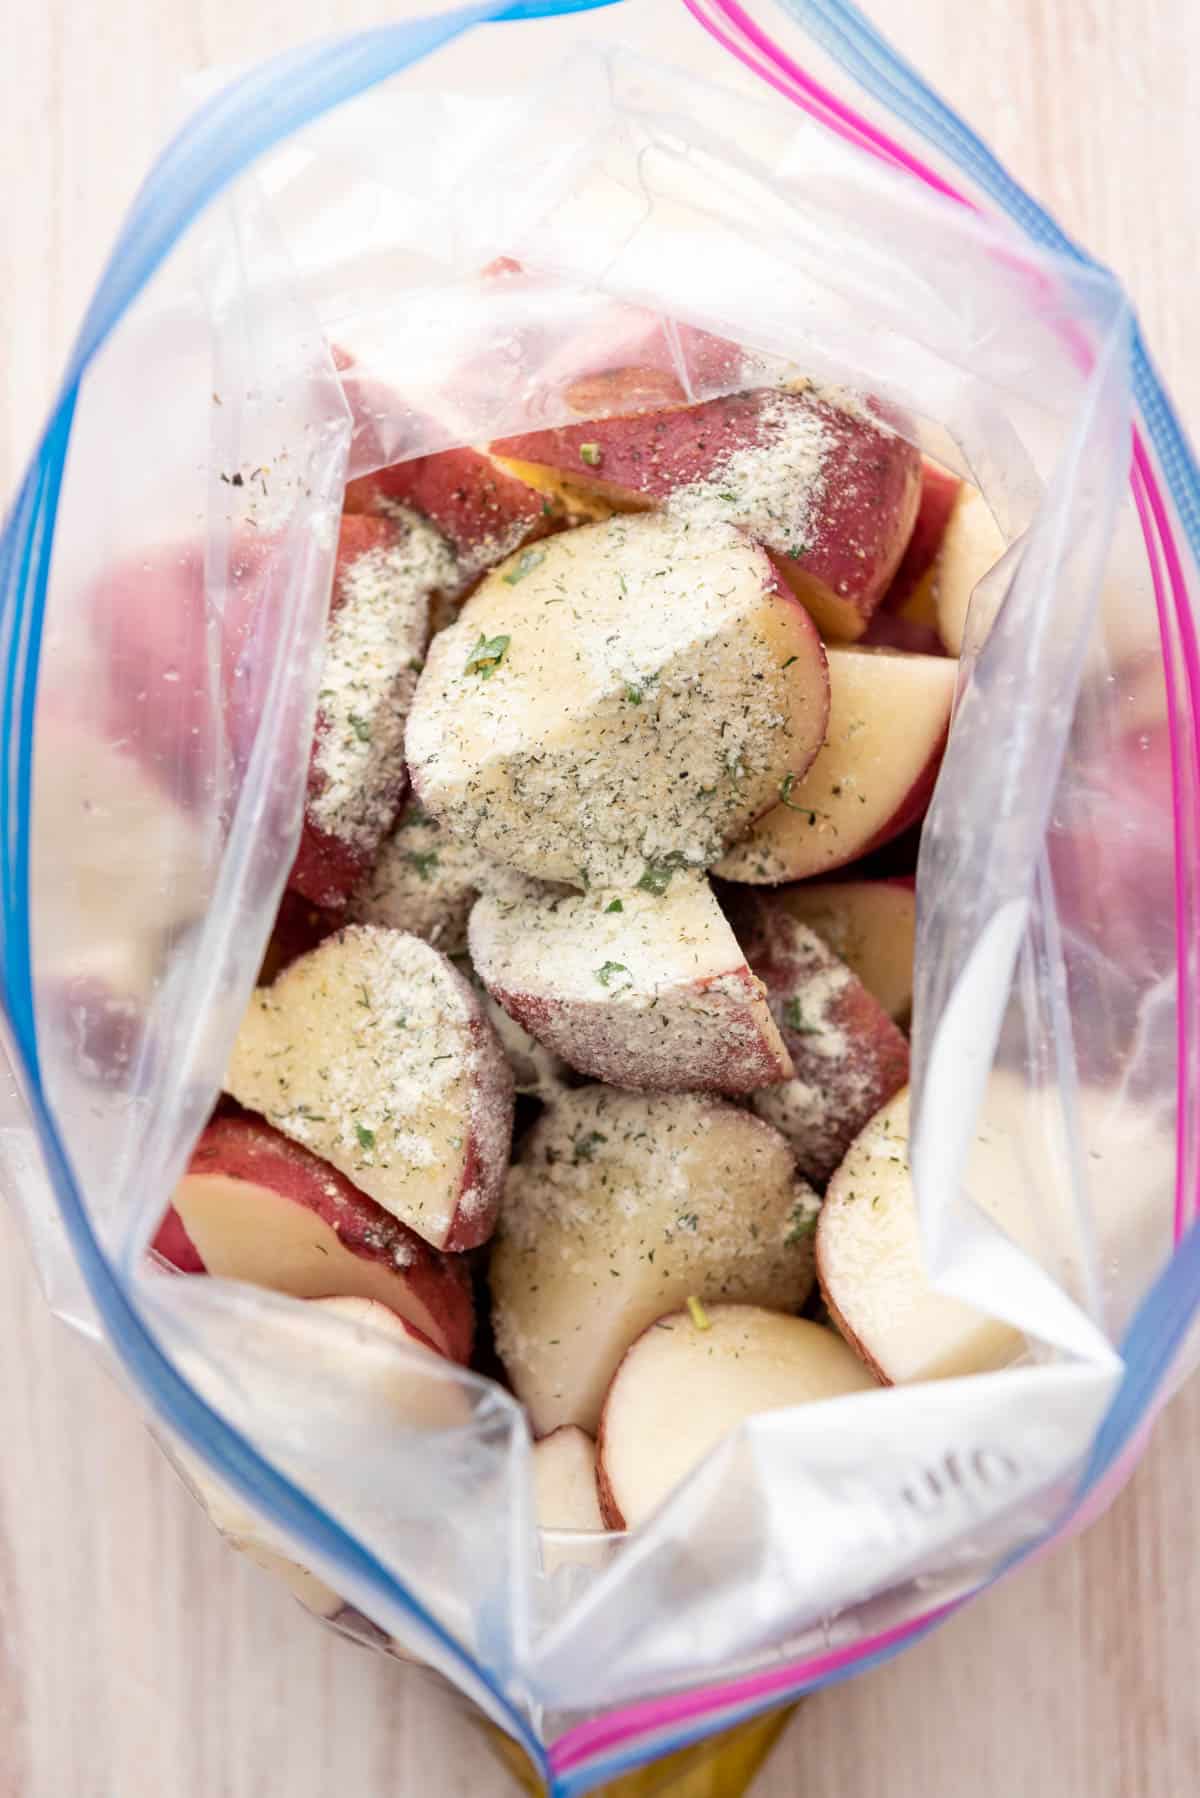 Adding homemade dry ranch seasoning to red potatoes in a Ziploc bag.